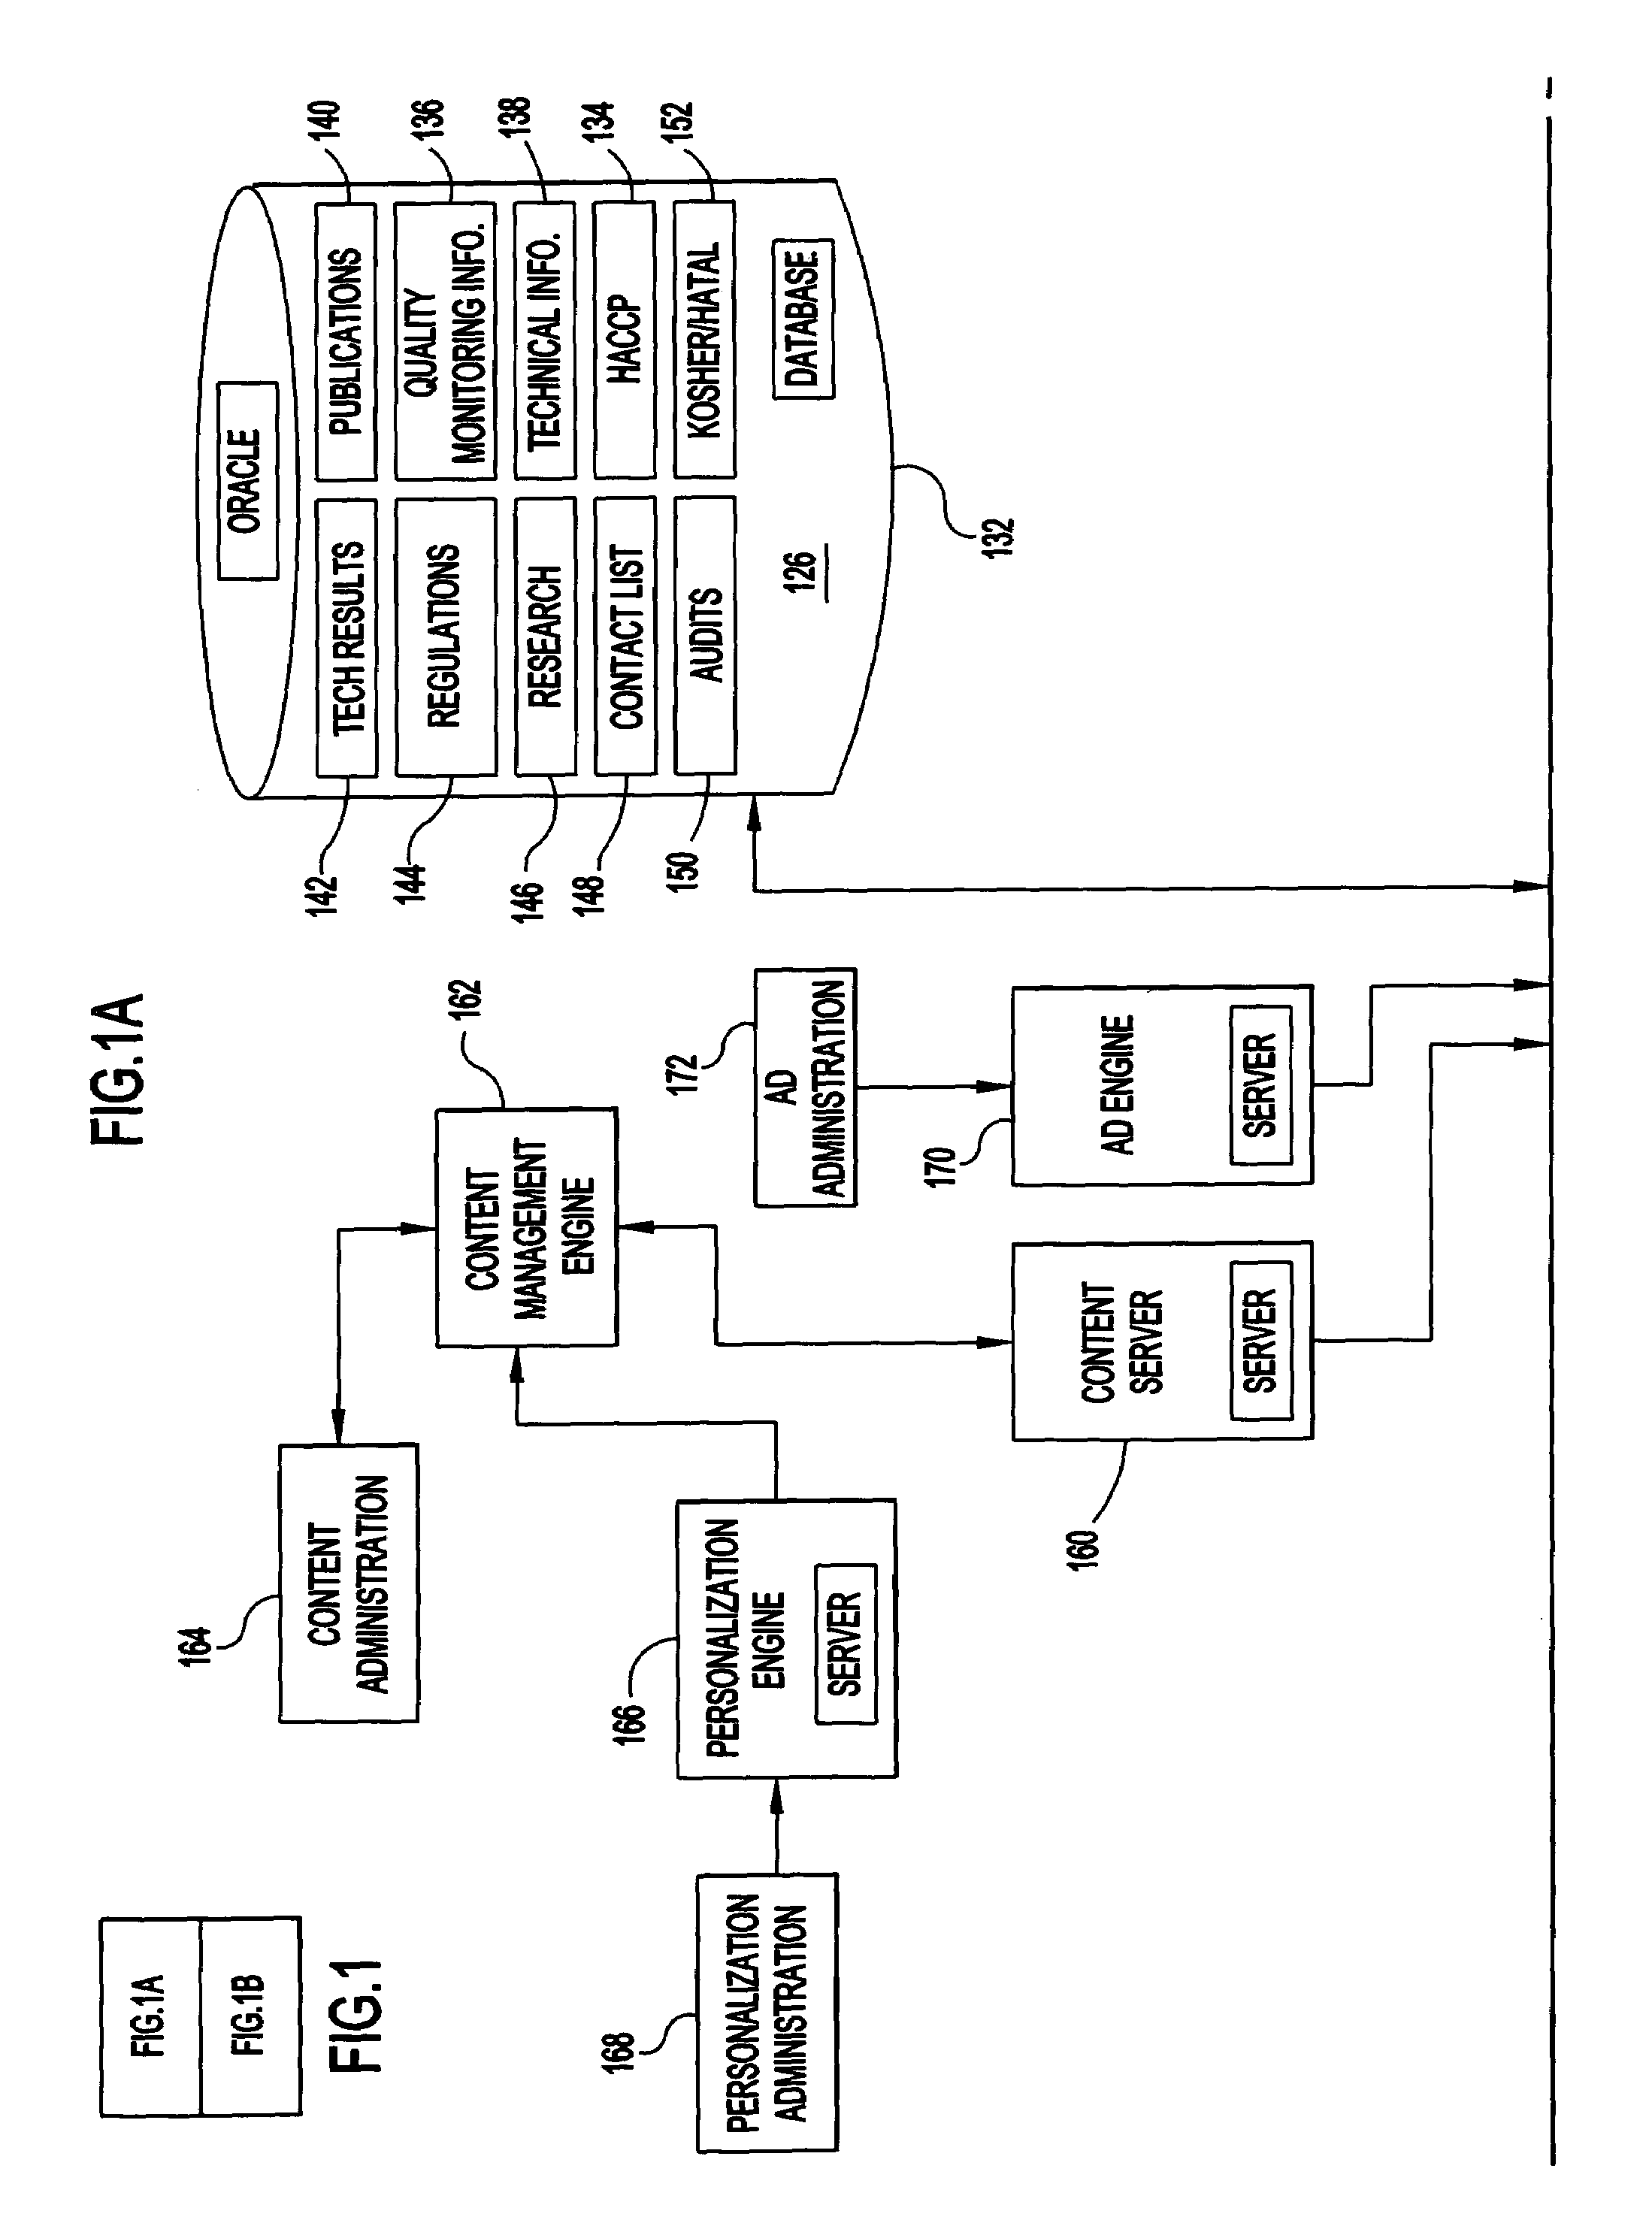 System, method and program product for sharing information